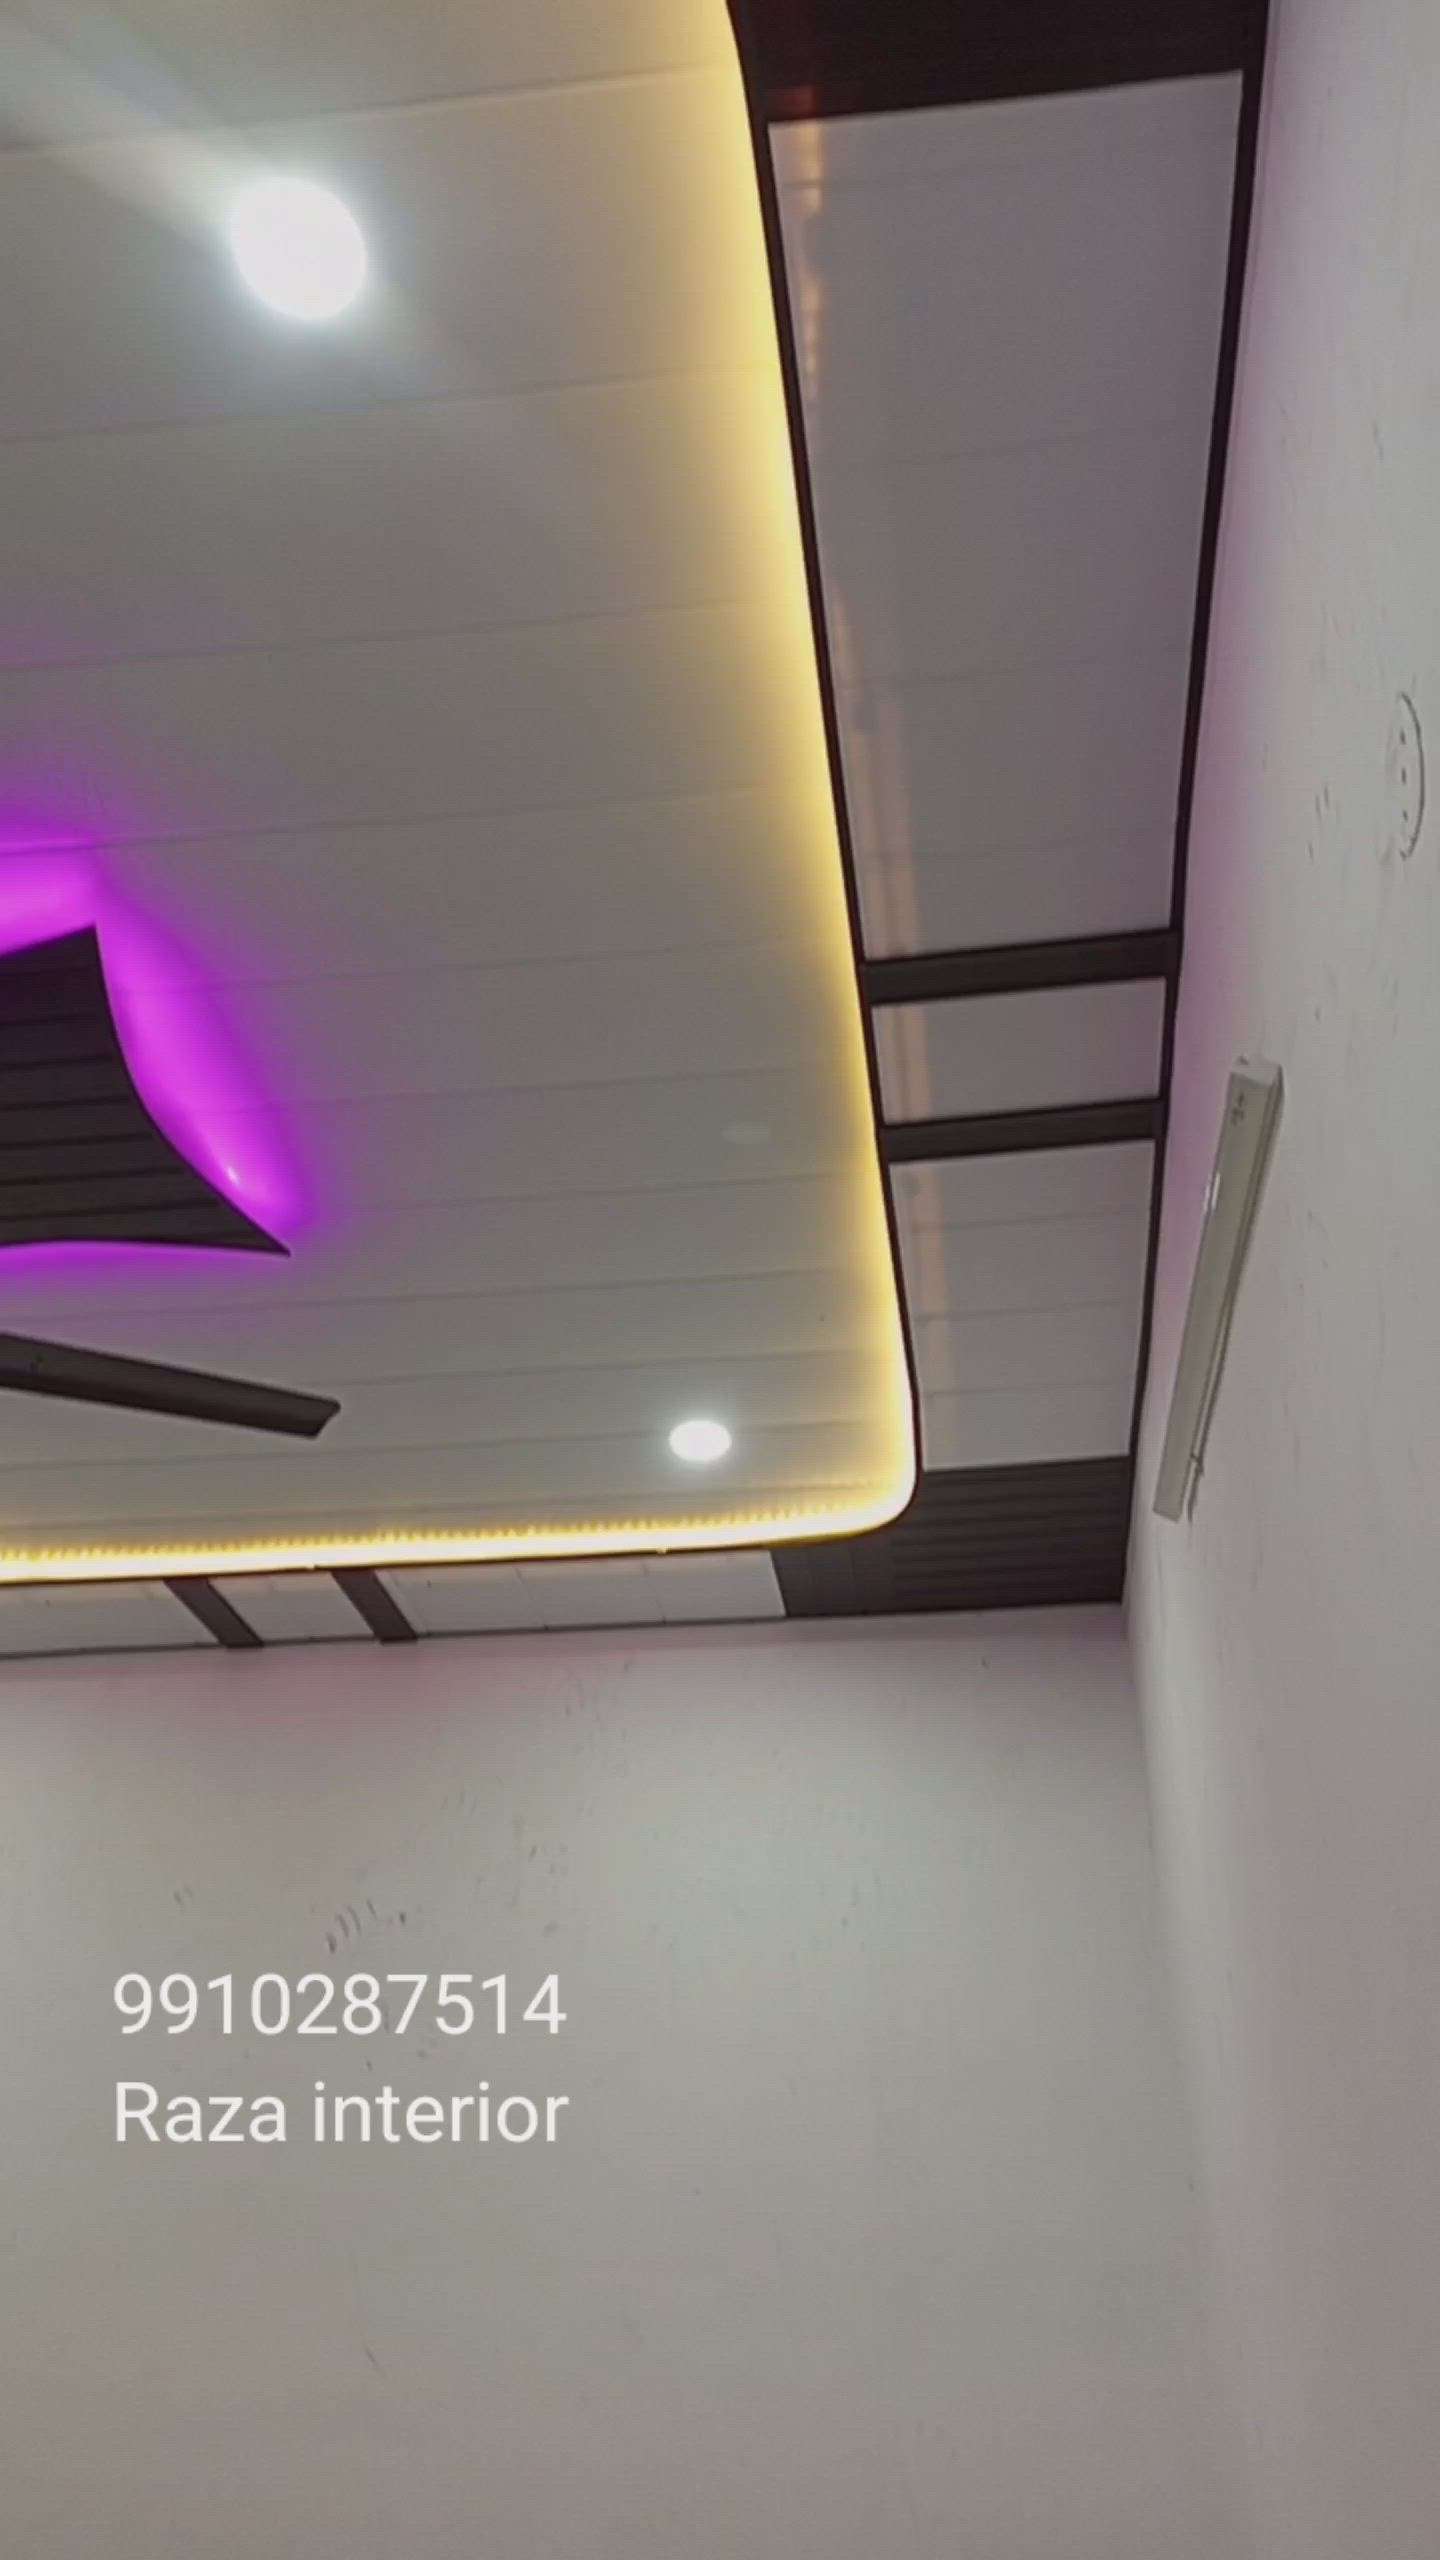 #PVCFalseCeiling #Pvcpanel #pvcpanelinstallation #pvcprice #Pvc #FalseCeiling #falseceilinglights #popceiling